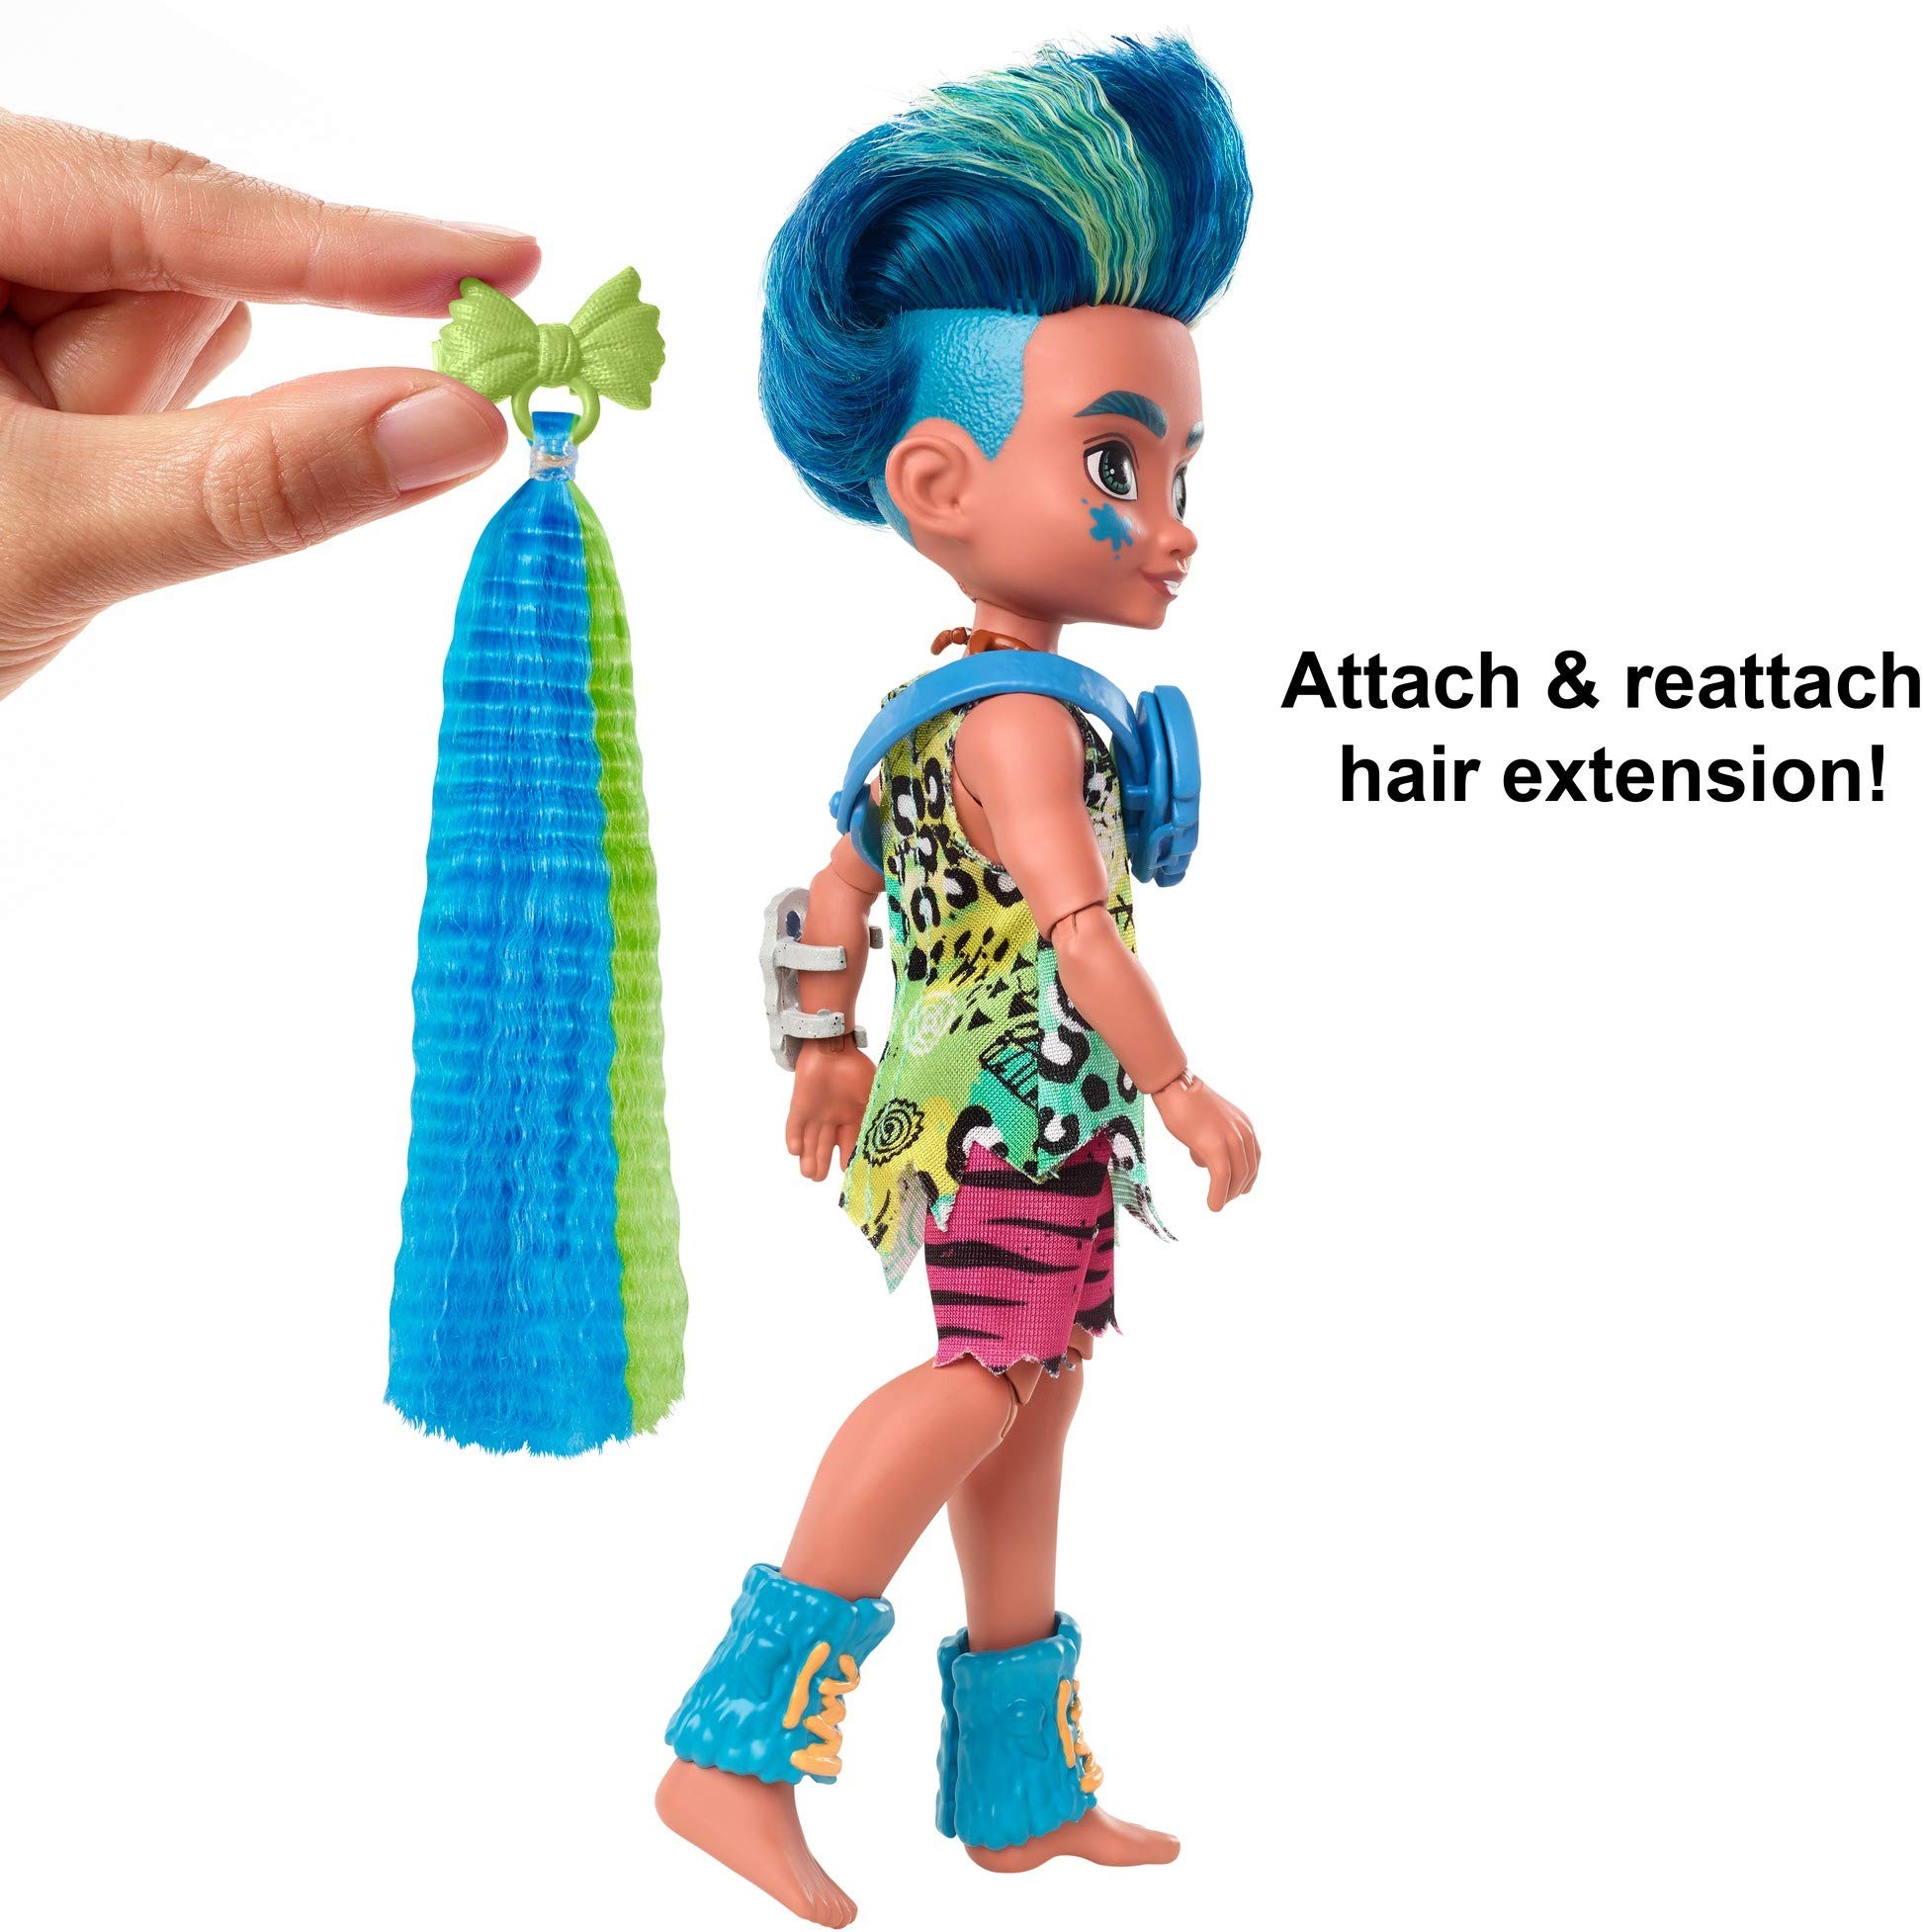 Cave Club Slate Doll (8 – 10-inch, Blue Hair) Poseable Prehistoric Fashion Doll with Dinosaur Pet and Accessories, Gift for 4 Year Olds and Up [Amazon Exclusive]